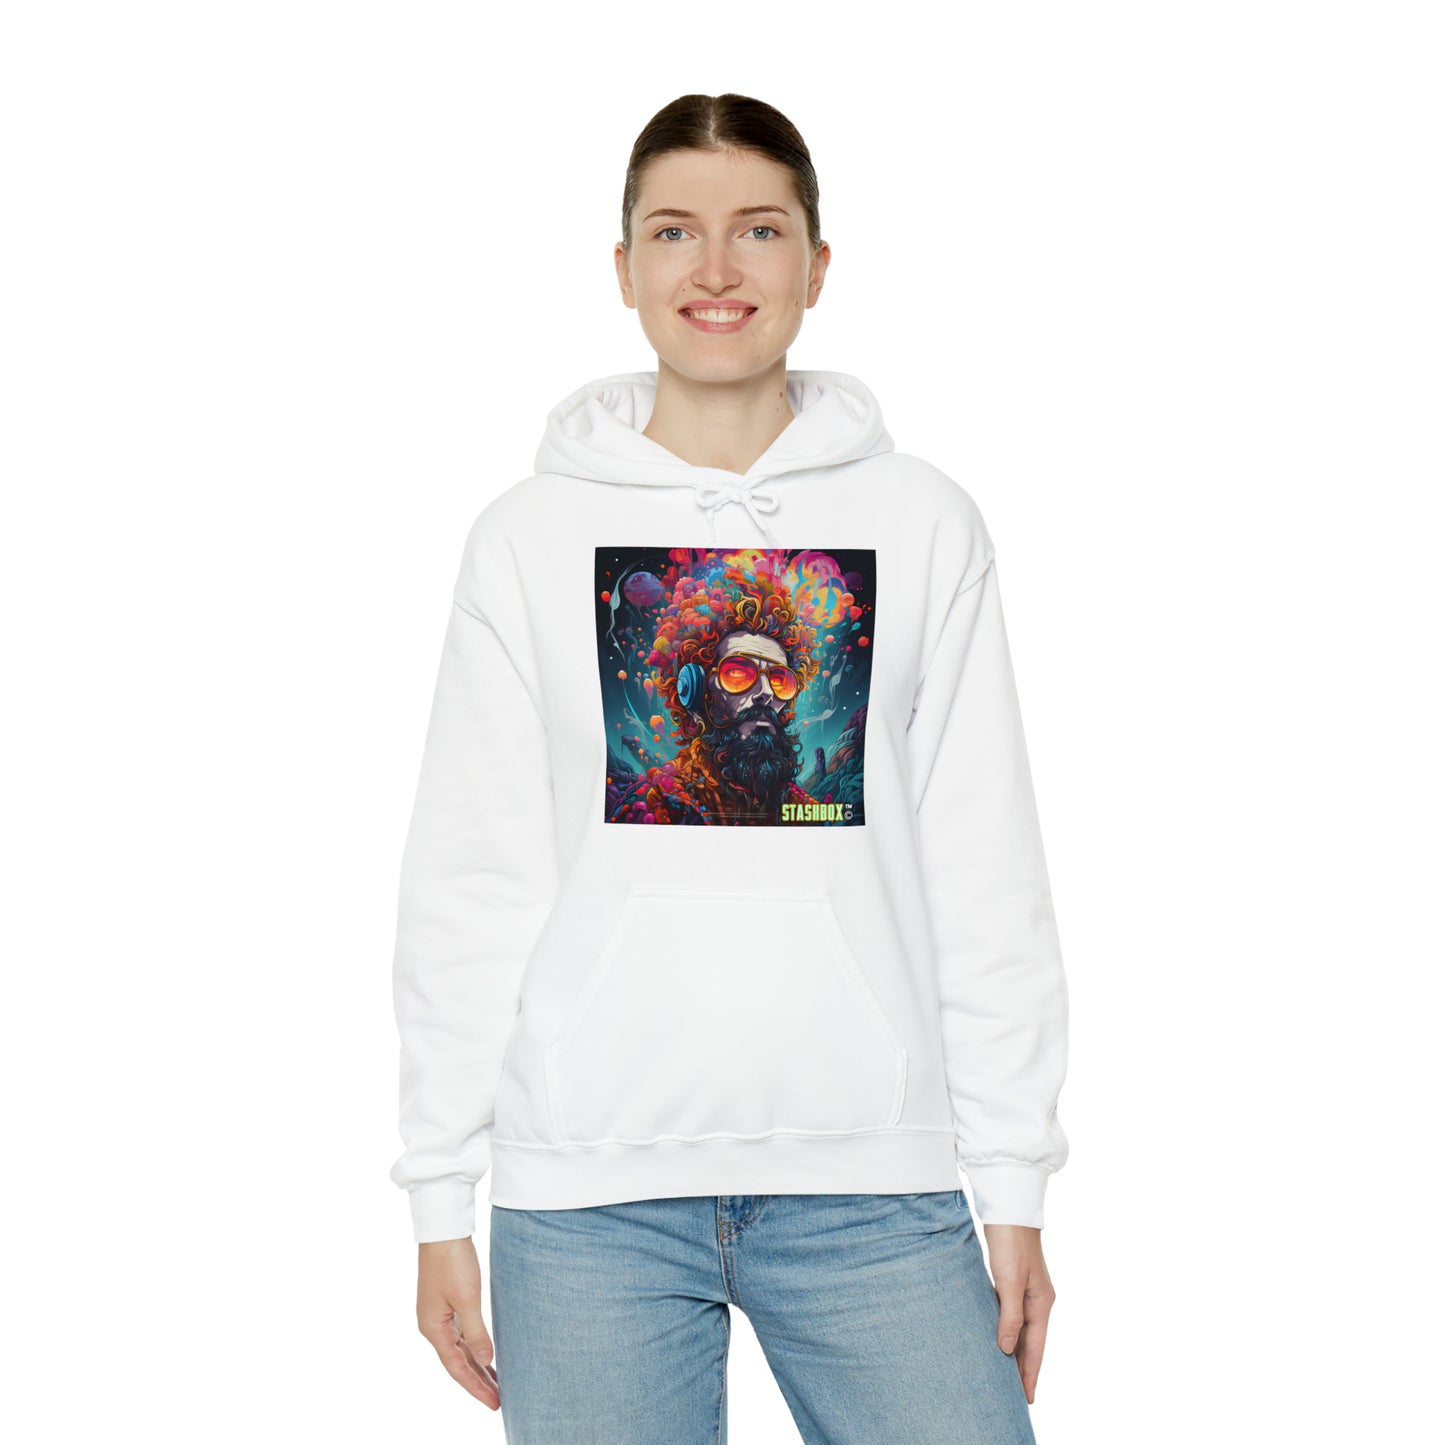 Step into the vibrant world of the Psychedelic MetaVerse with our Producer's Psychedelic Design #003 Hooded Sweatshirt. Digital creativity on fabric, exclusively at Stashbox.ai.